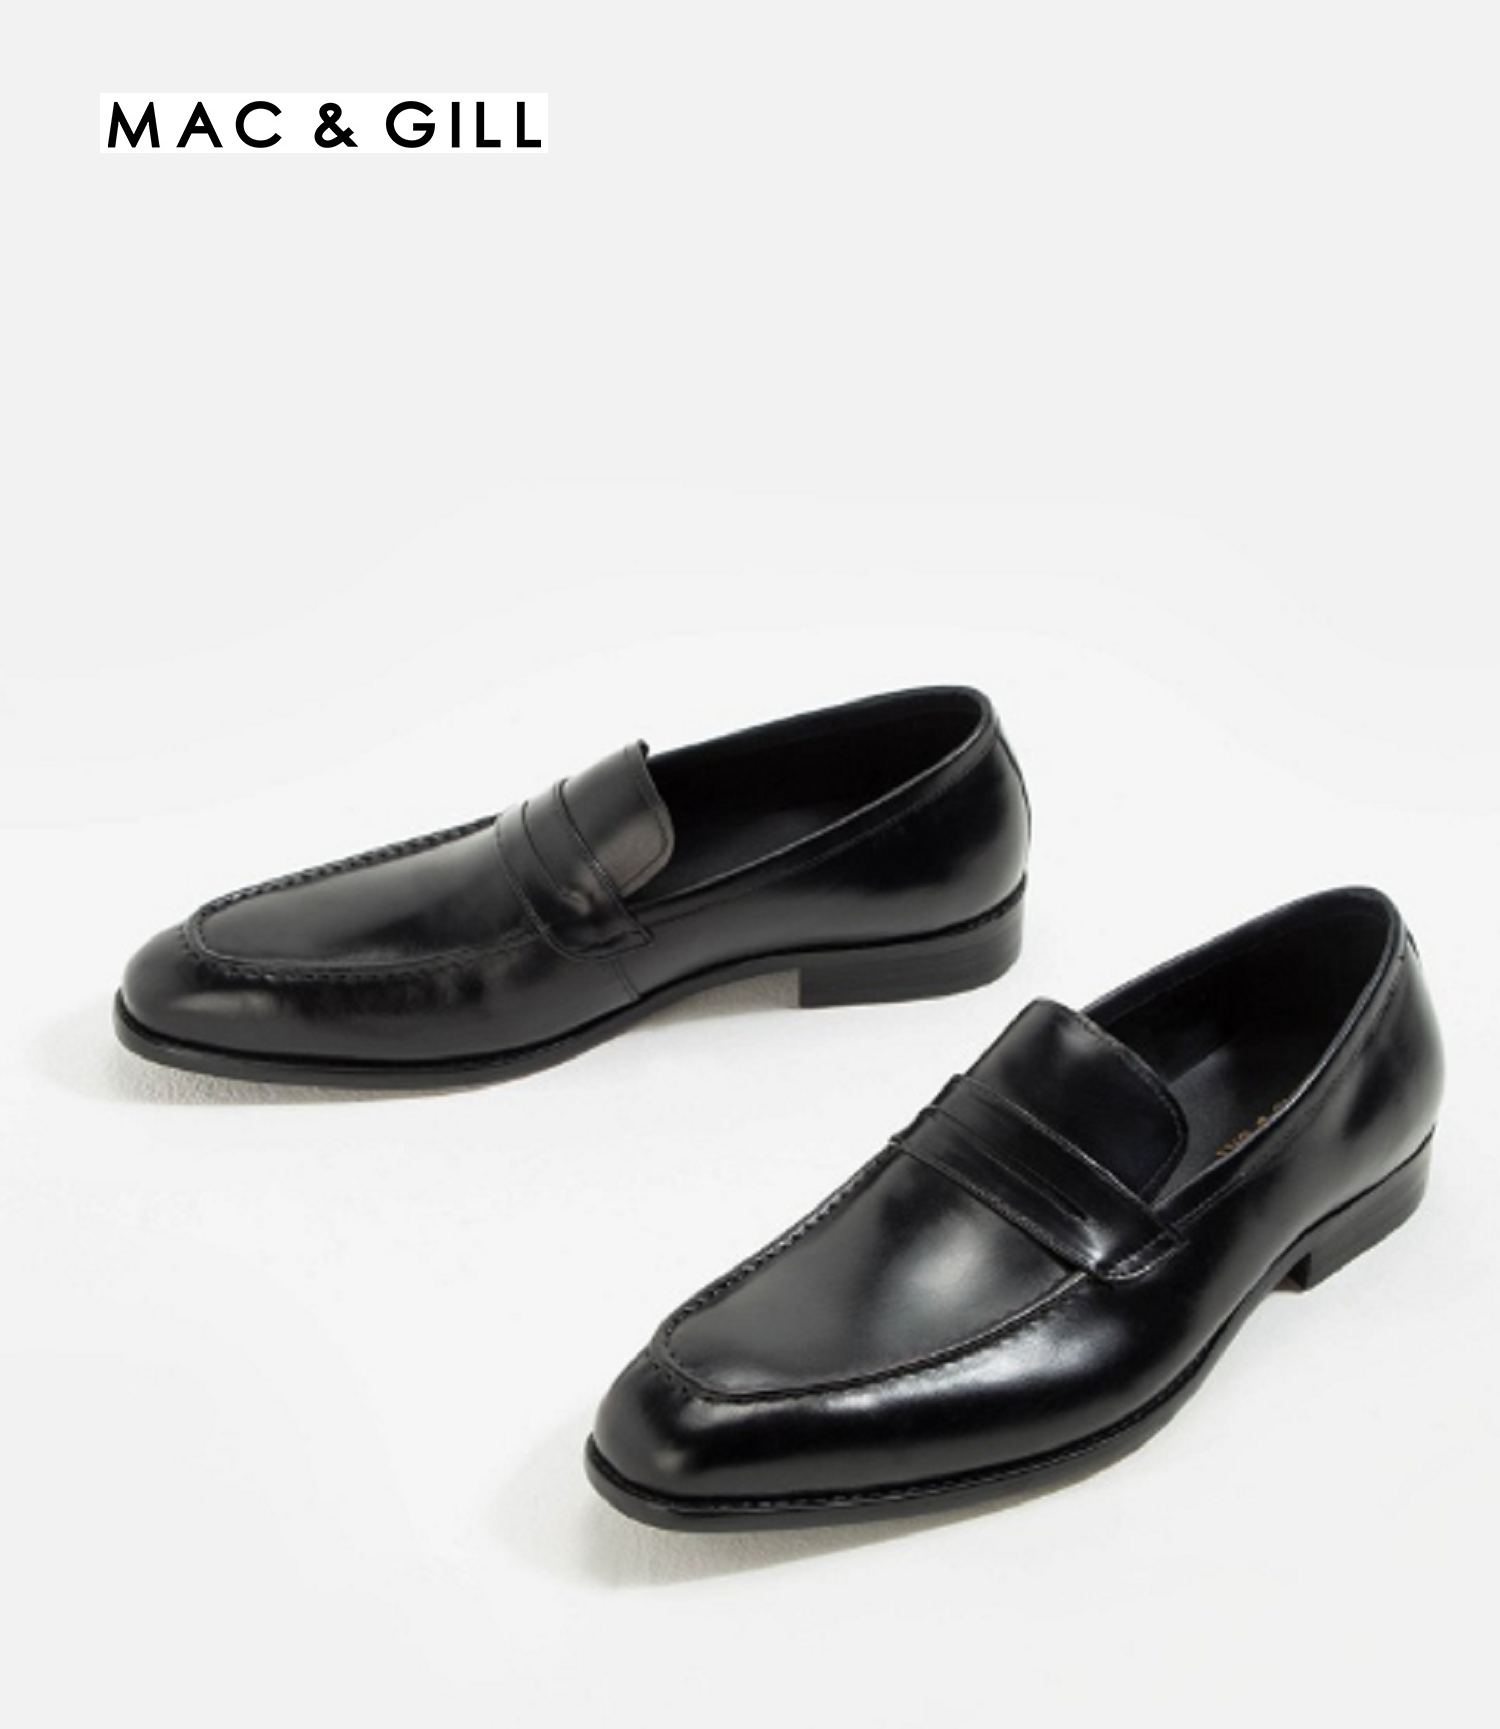 MAC&GILL BARNEY OXFORDS LEATHER Good Year Welted in Black